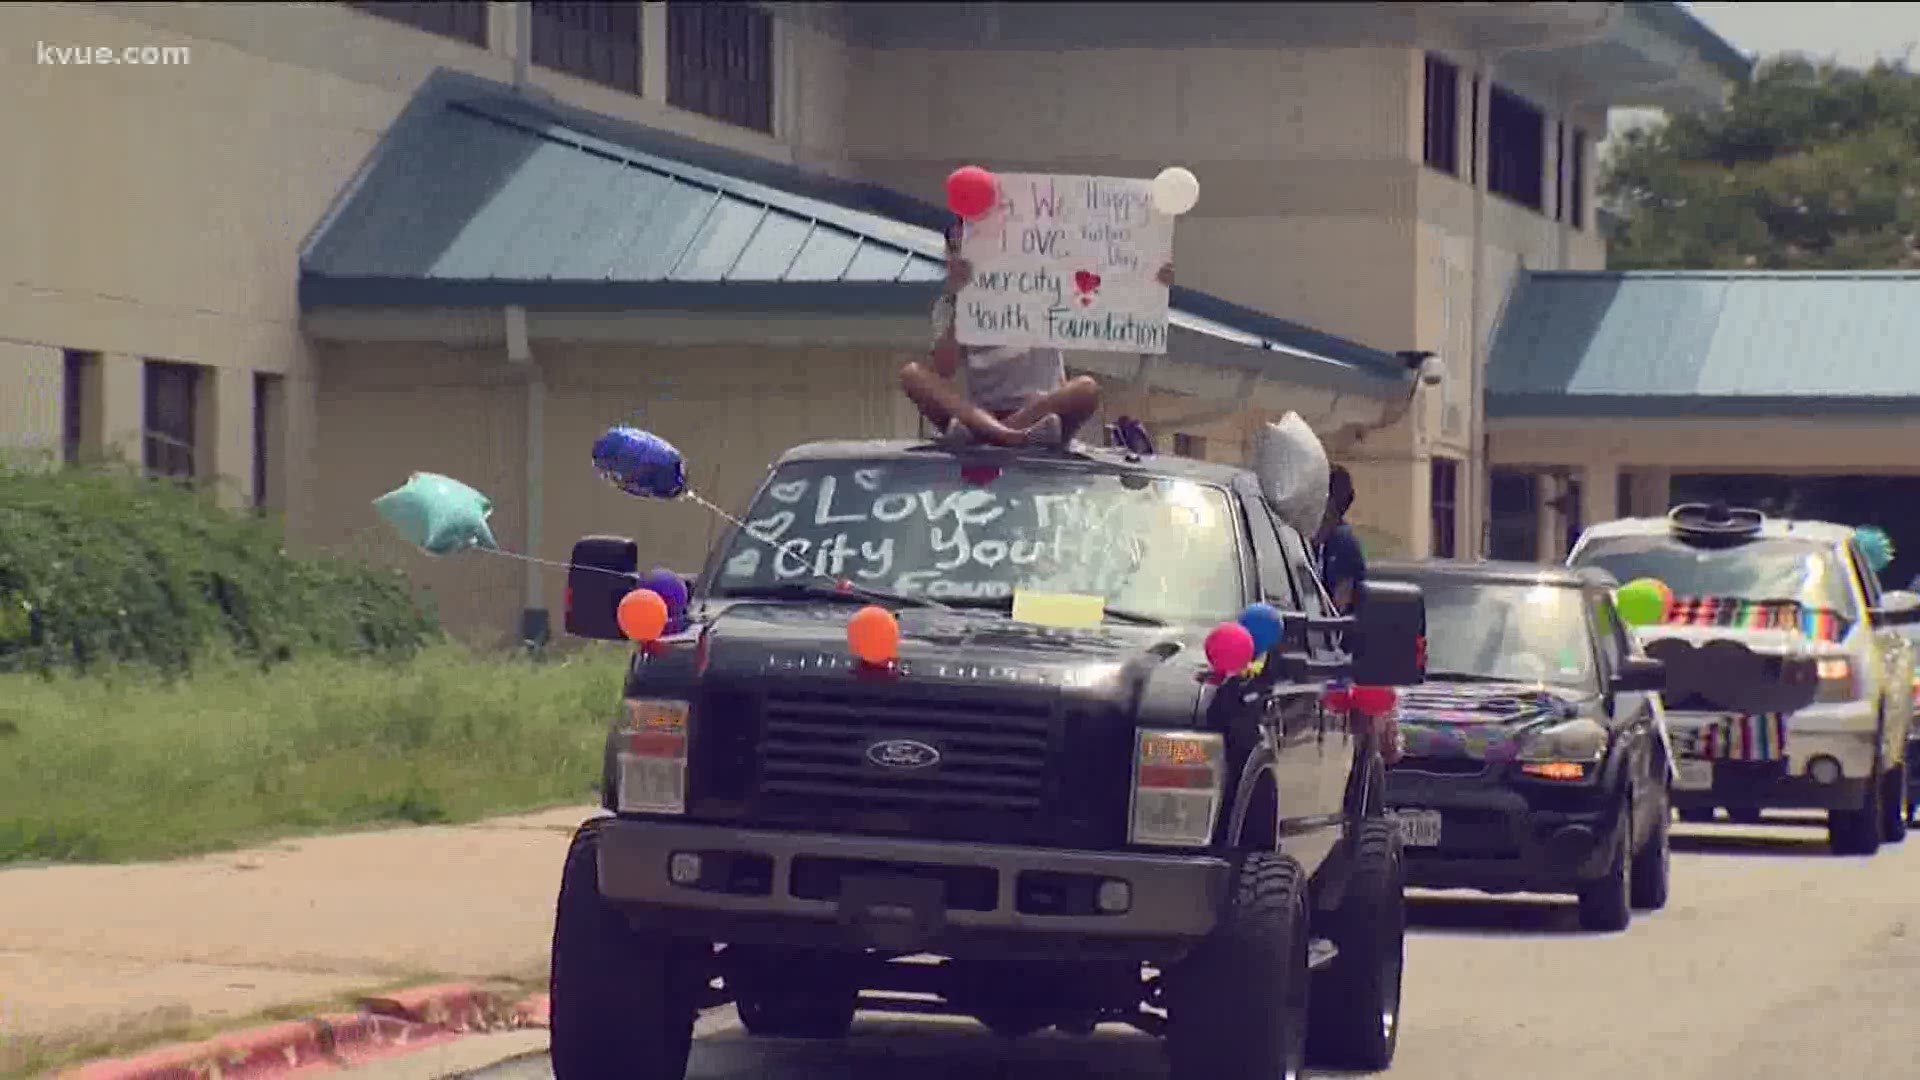 The Father's Day celebrations started a day earlier in Austin, with a car parade through the Dove Springs community.